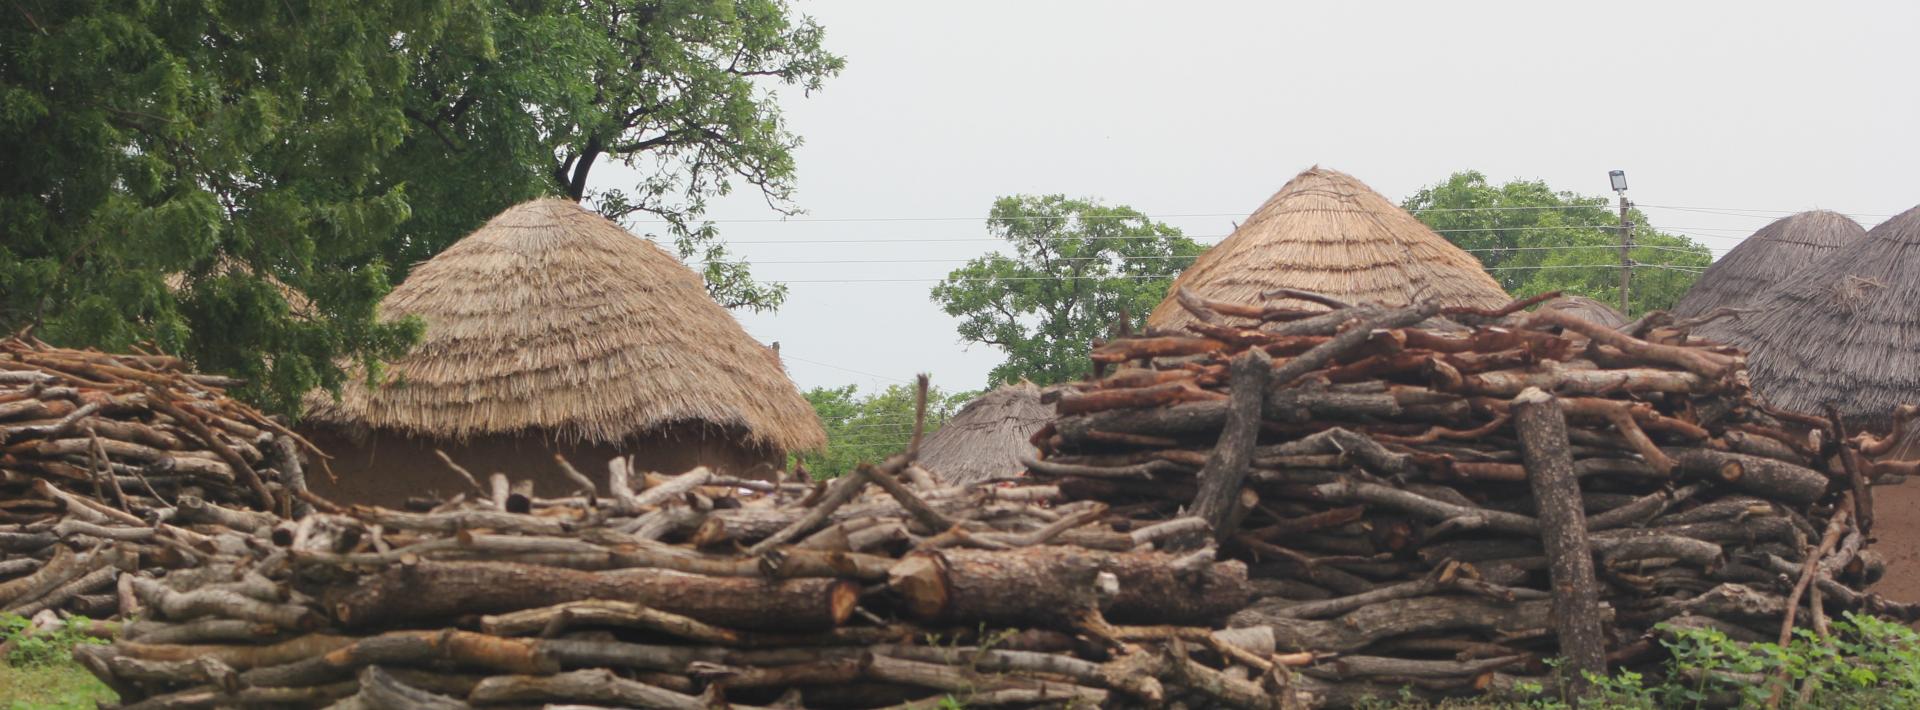 village huts with firewood piled in front of them. 